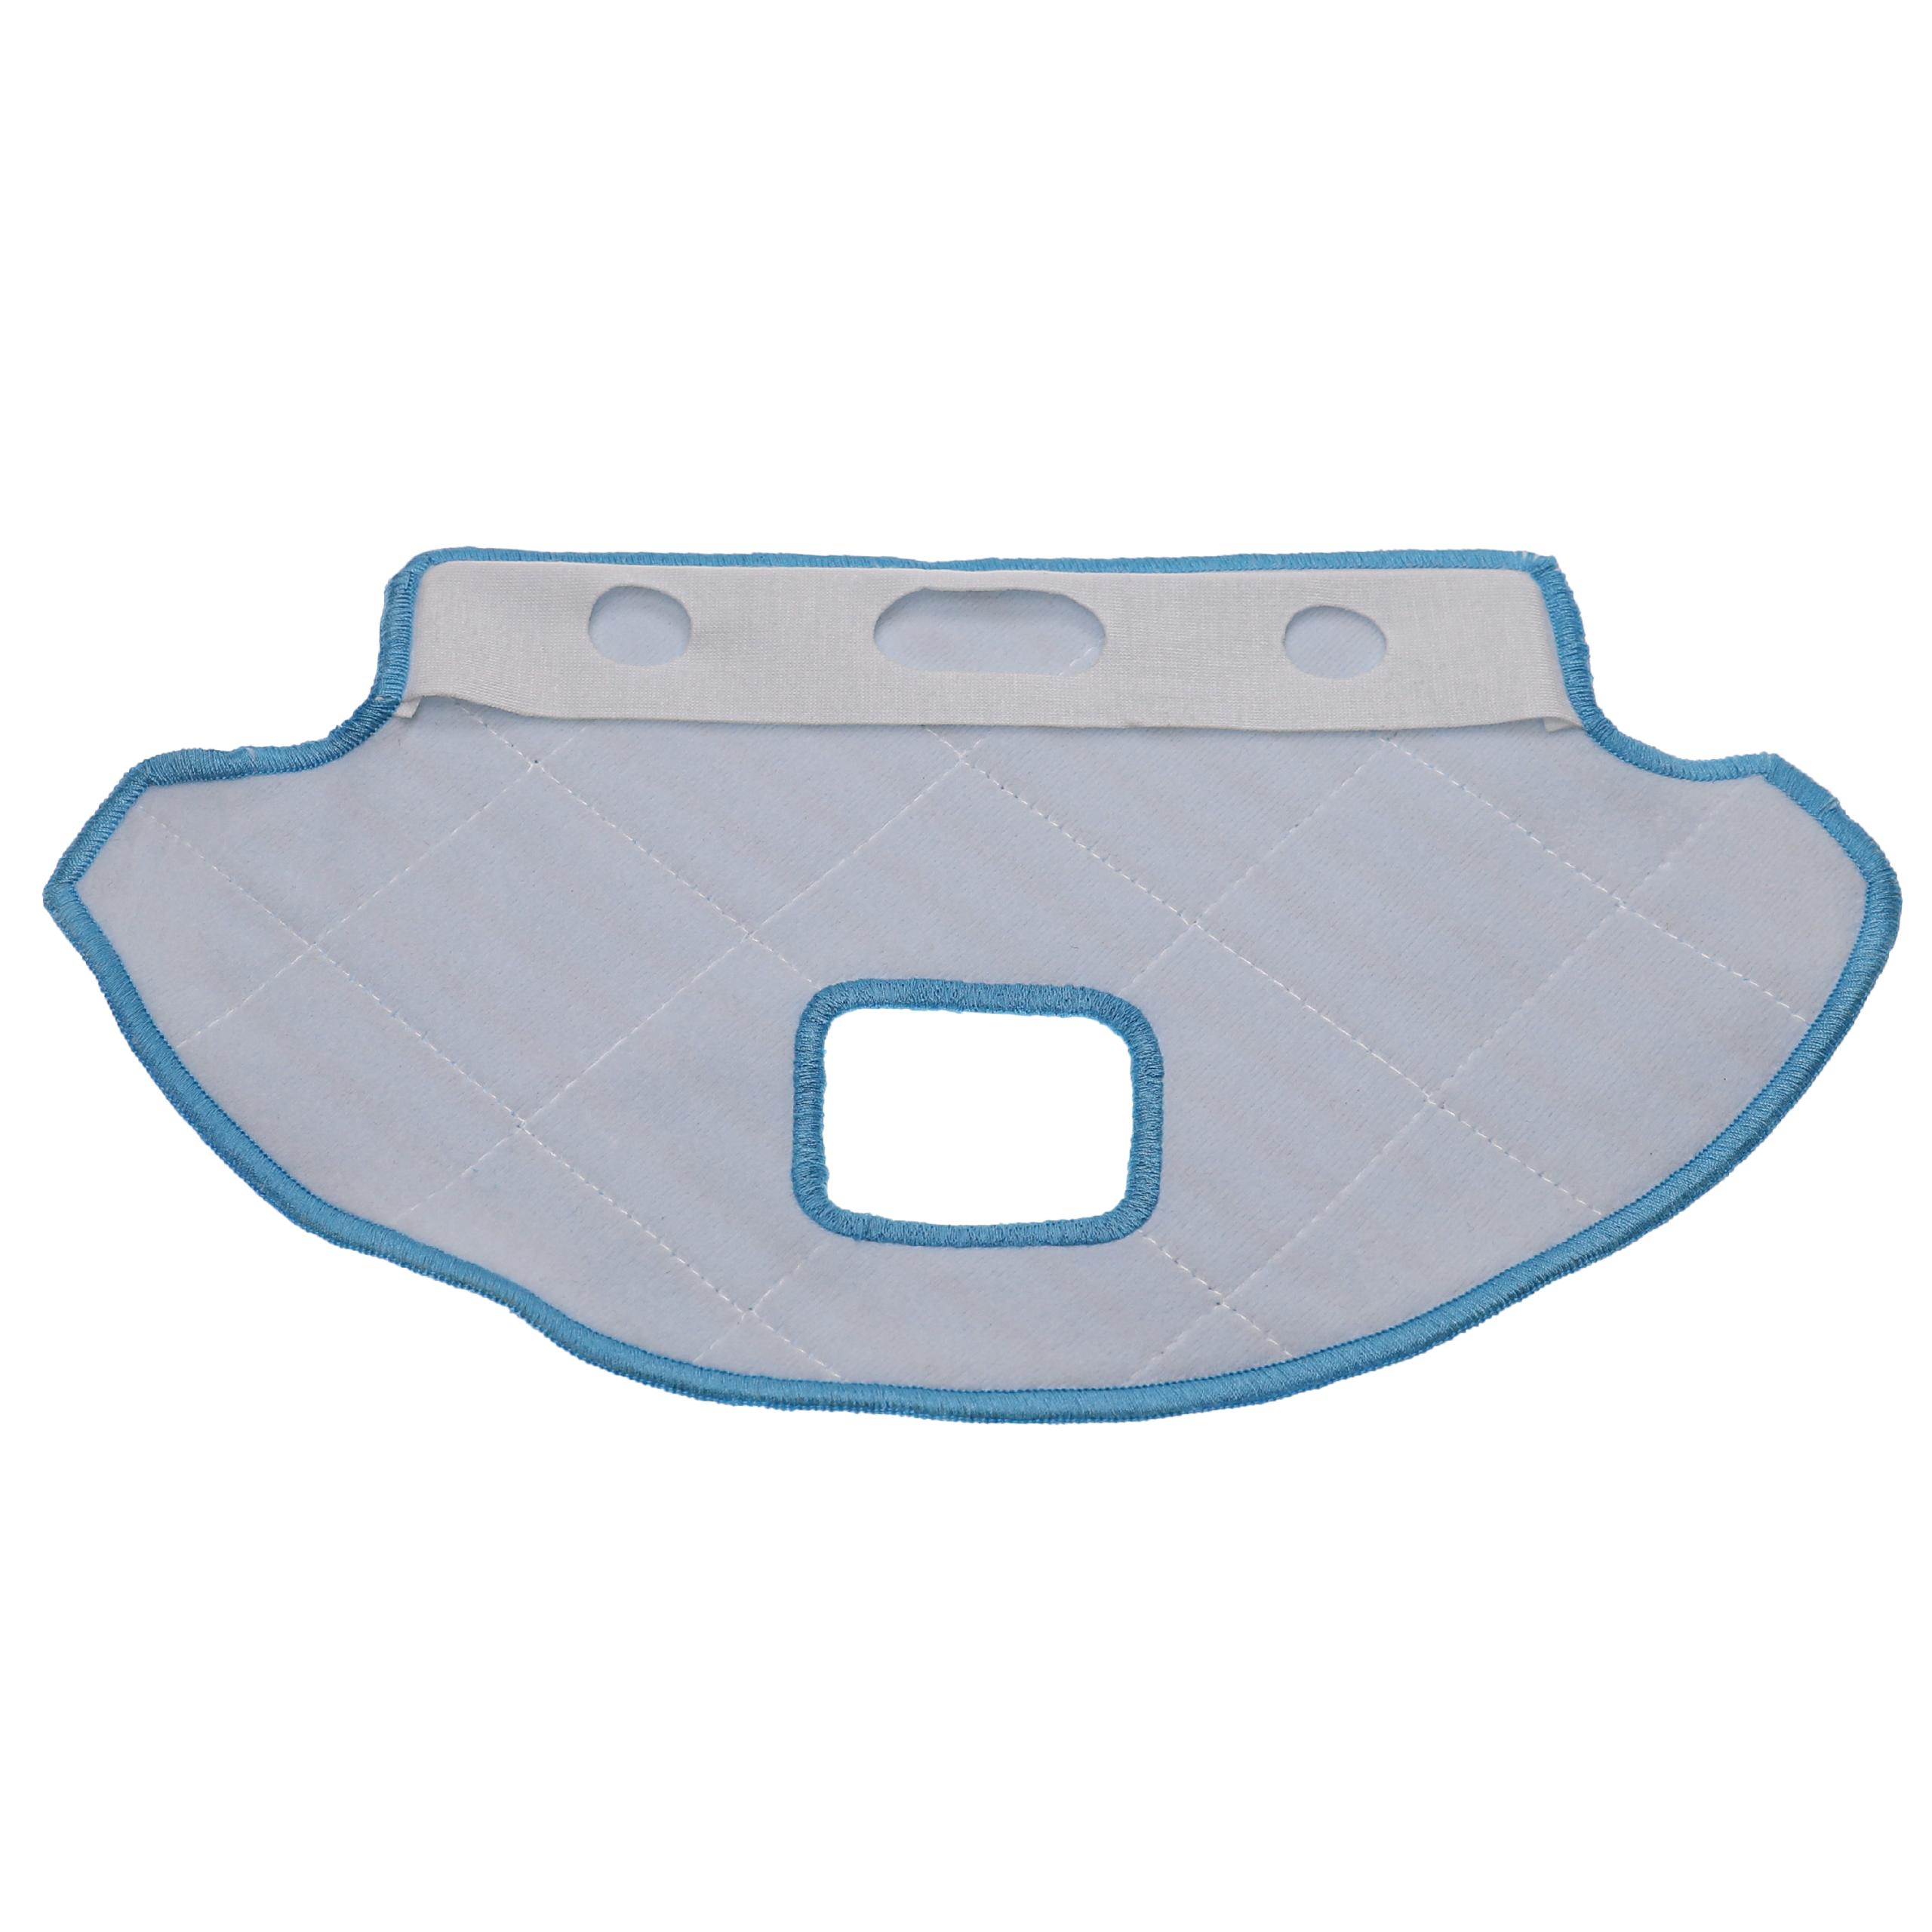 Water Tank Support (incl. Mopping Pad) suitable for Ecovacs Deebot Ozmo 930 Robot Vacuum Cleaner - plastic, bl